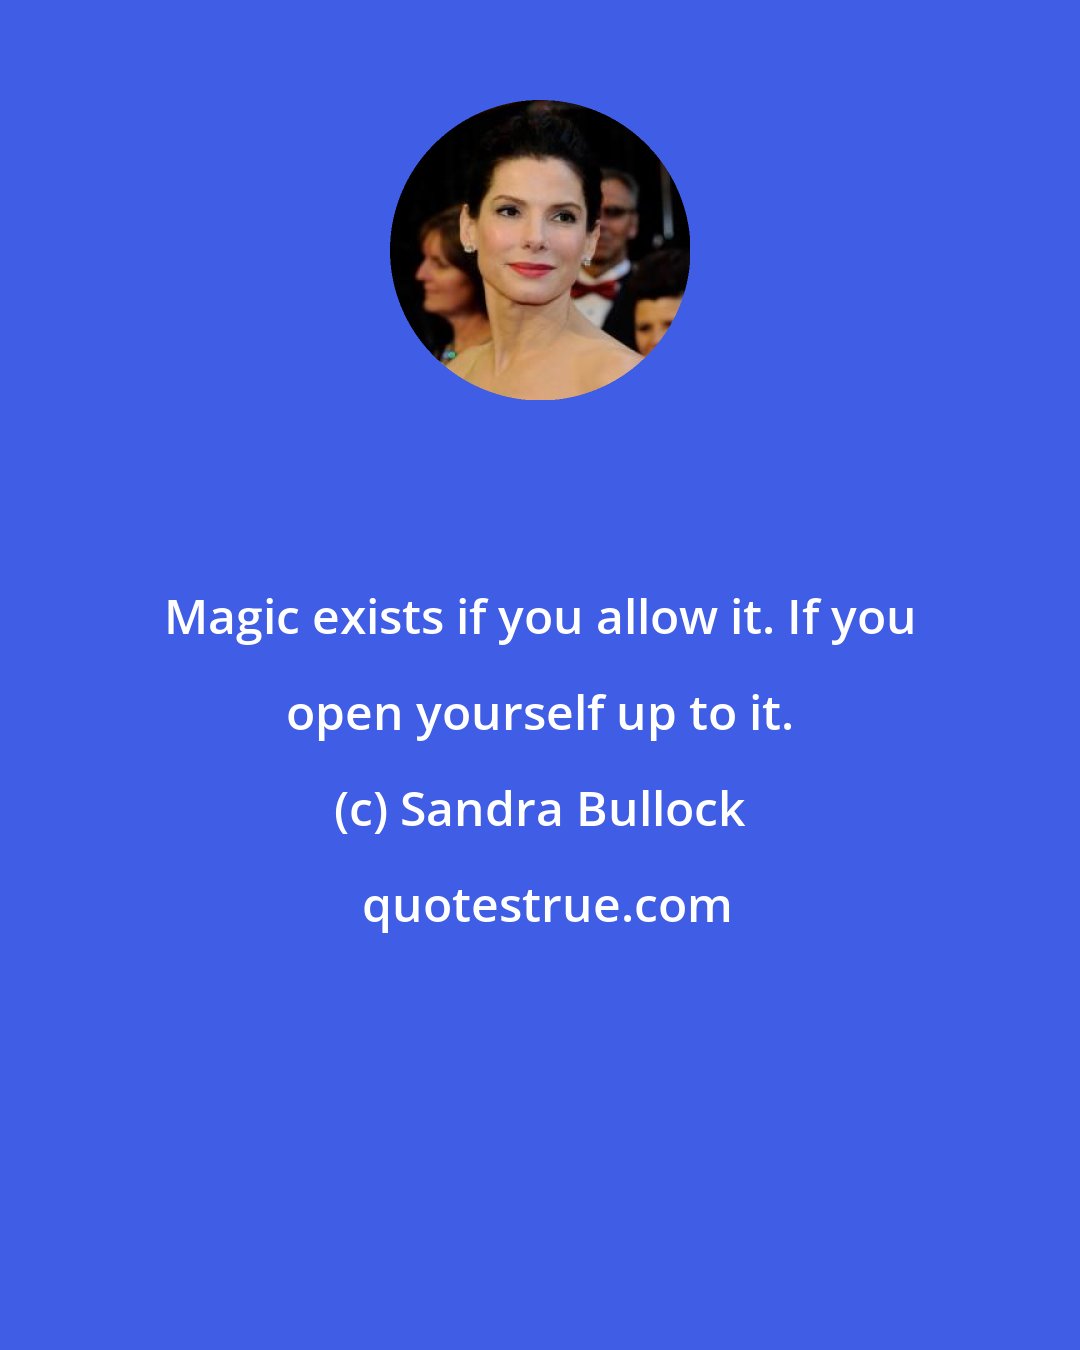 Sandra Bullock: Magic exists if you allow it. If you open yourself up to it.